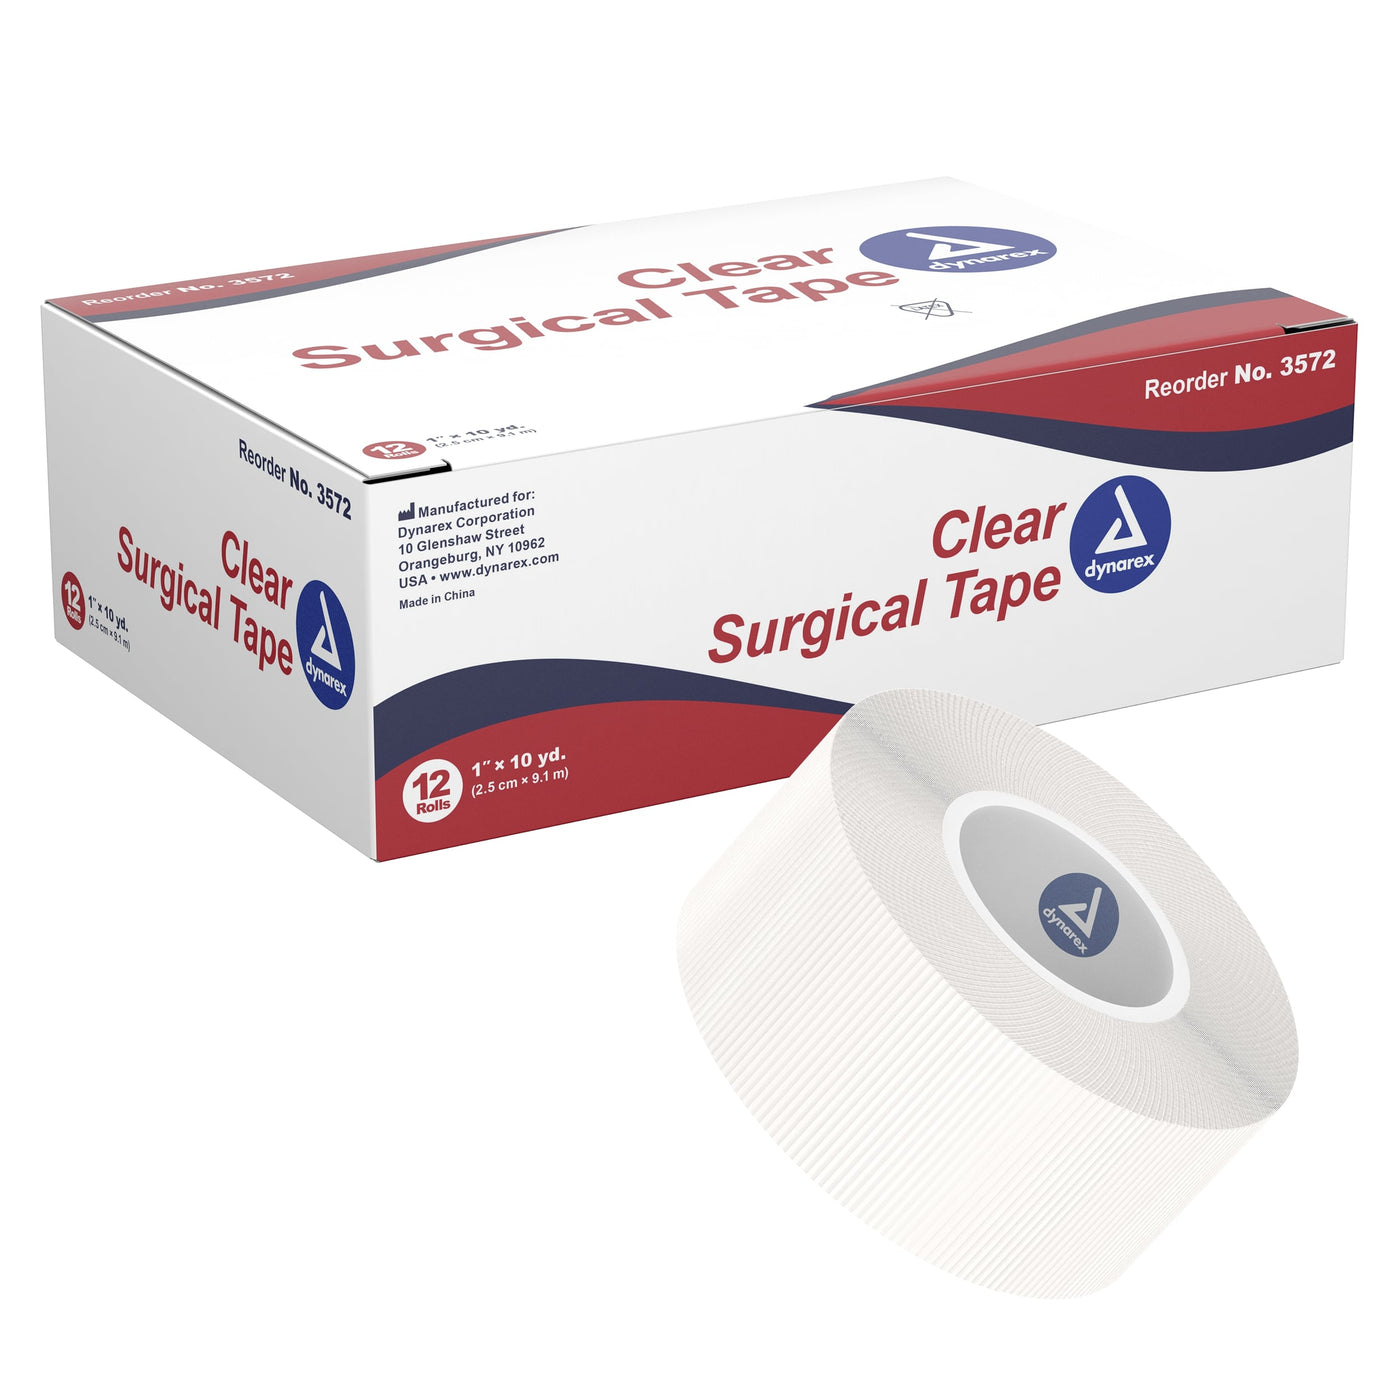 Dynarex Clear Surgical Tape - Station Prep. & Barriers - Mithra Tattoo Supplies Canada